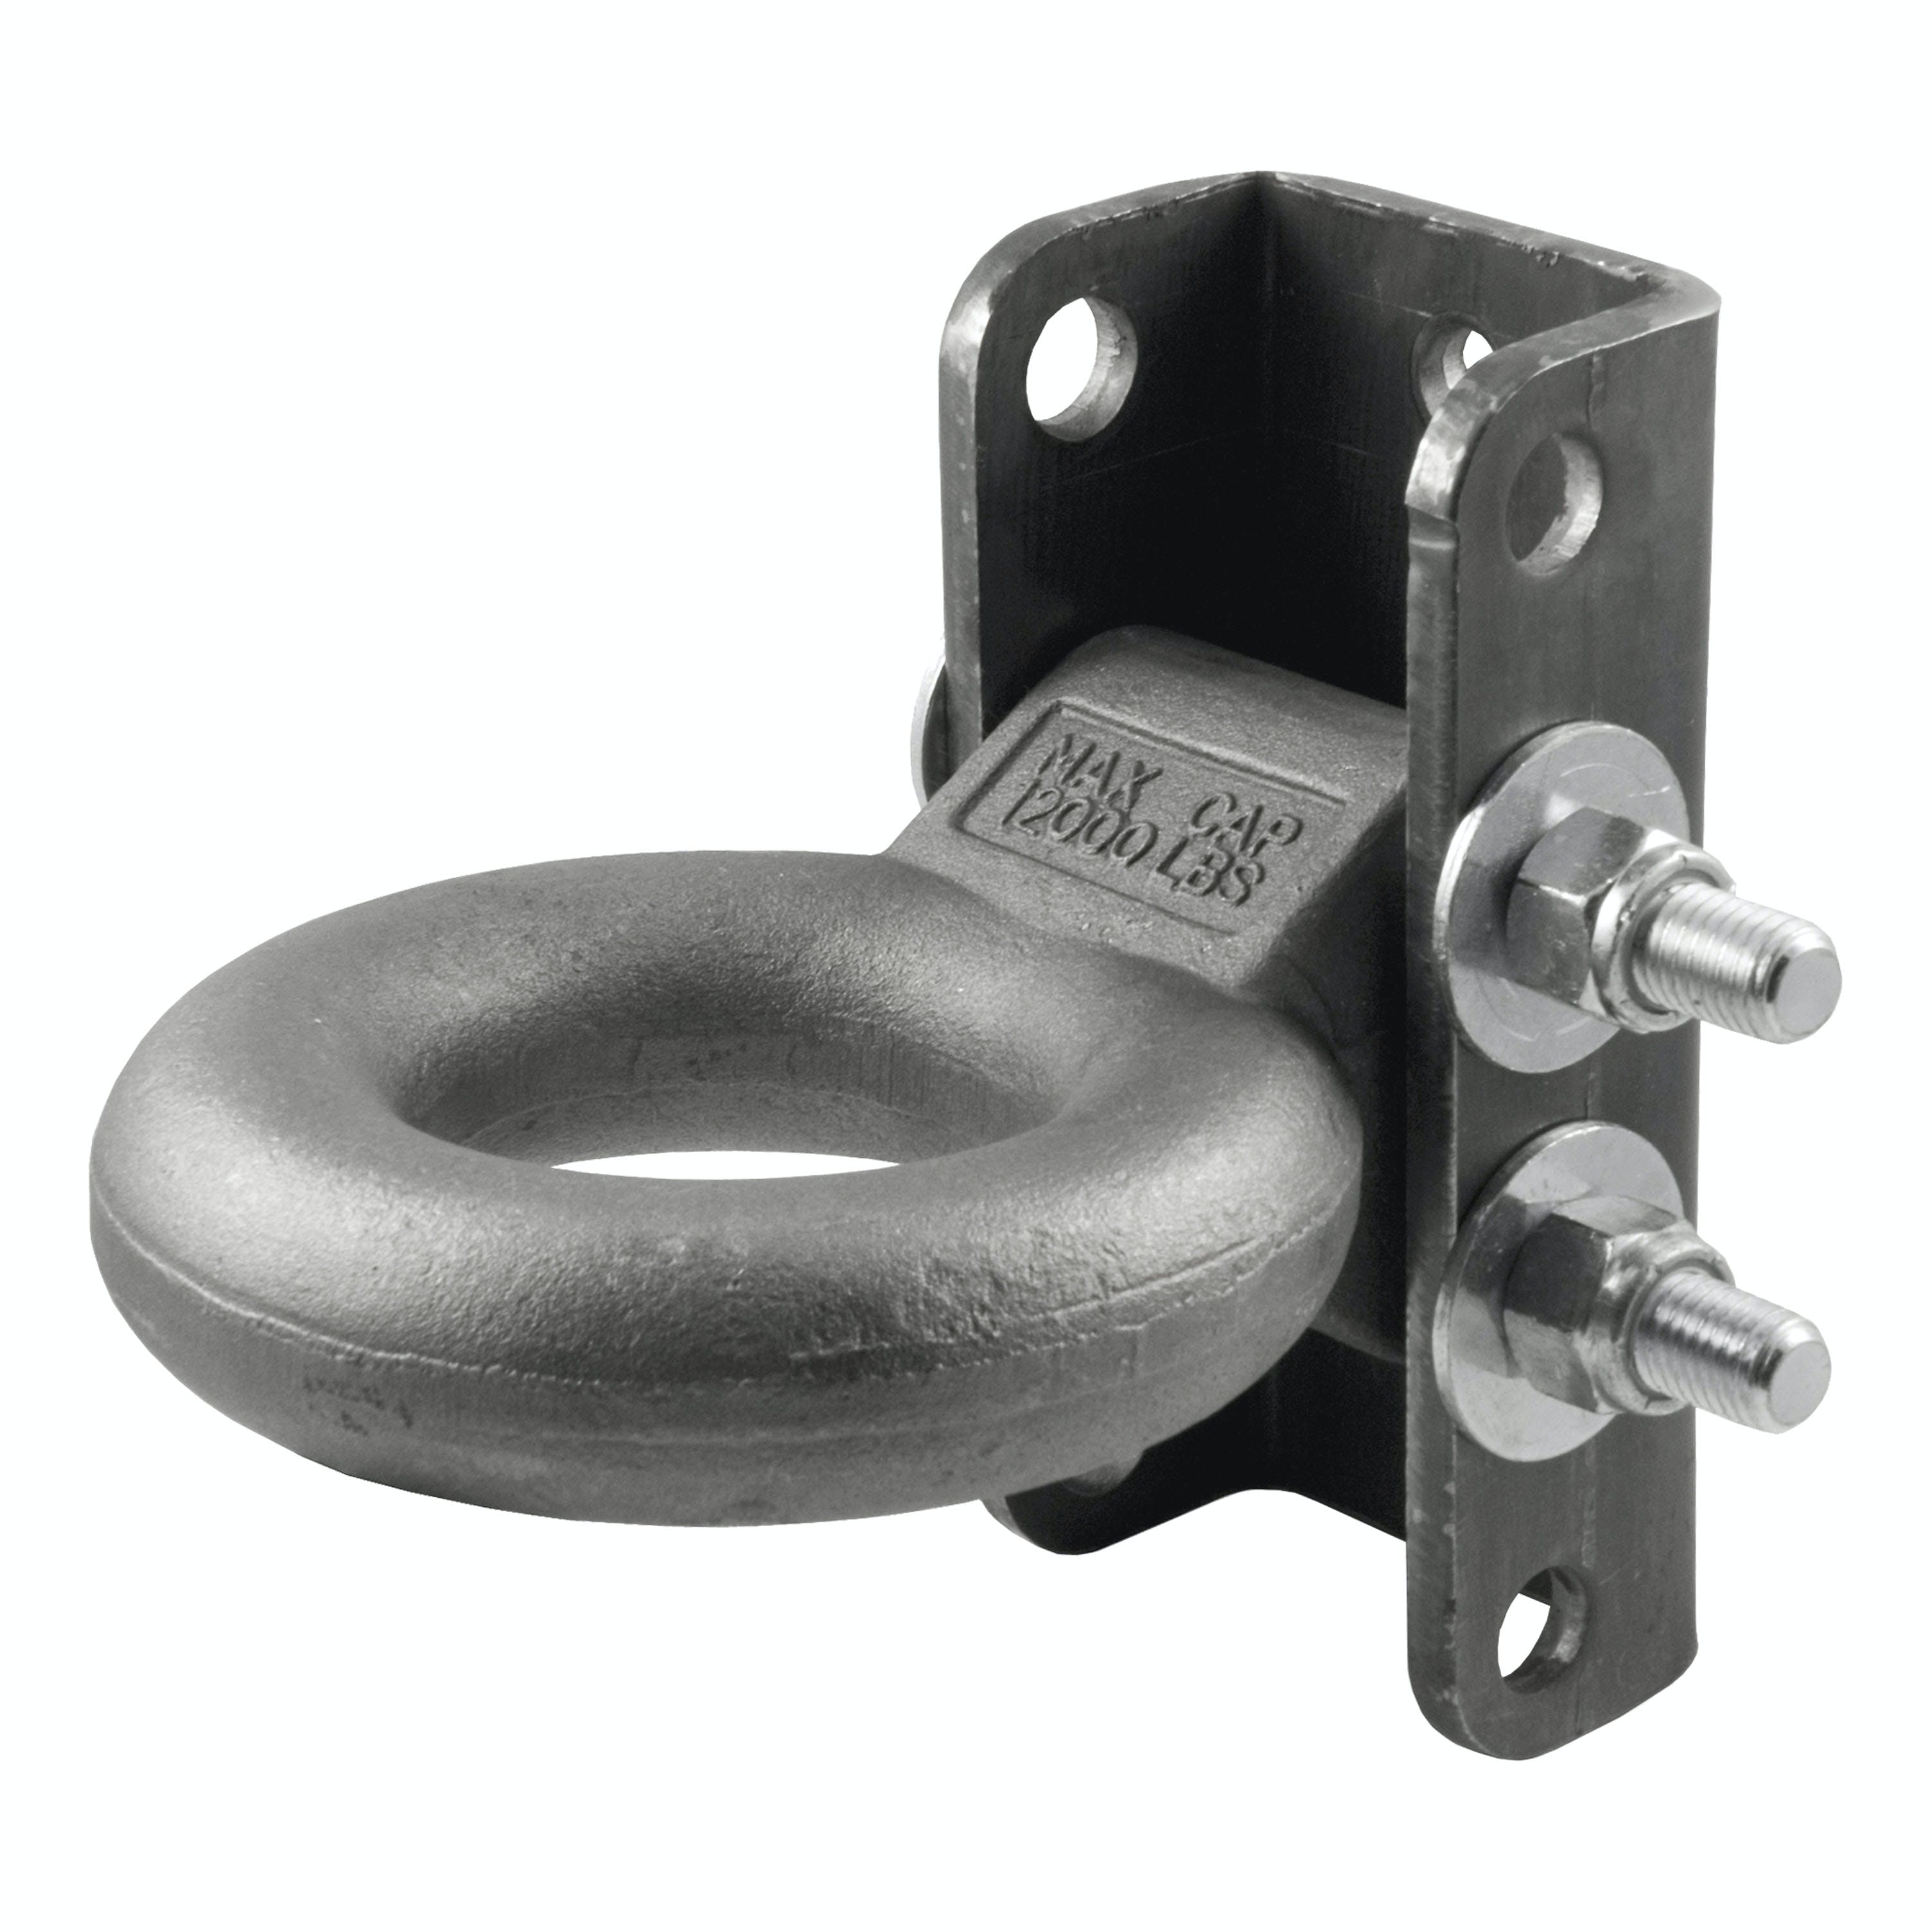 CURT 48630 Adjustable Lunette Ring (12,000 lbs., 3 Eye, 7-1/2 Channel Height, Packaged)